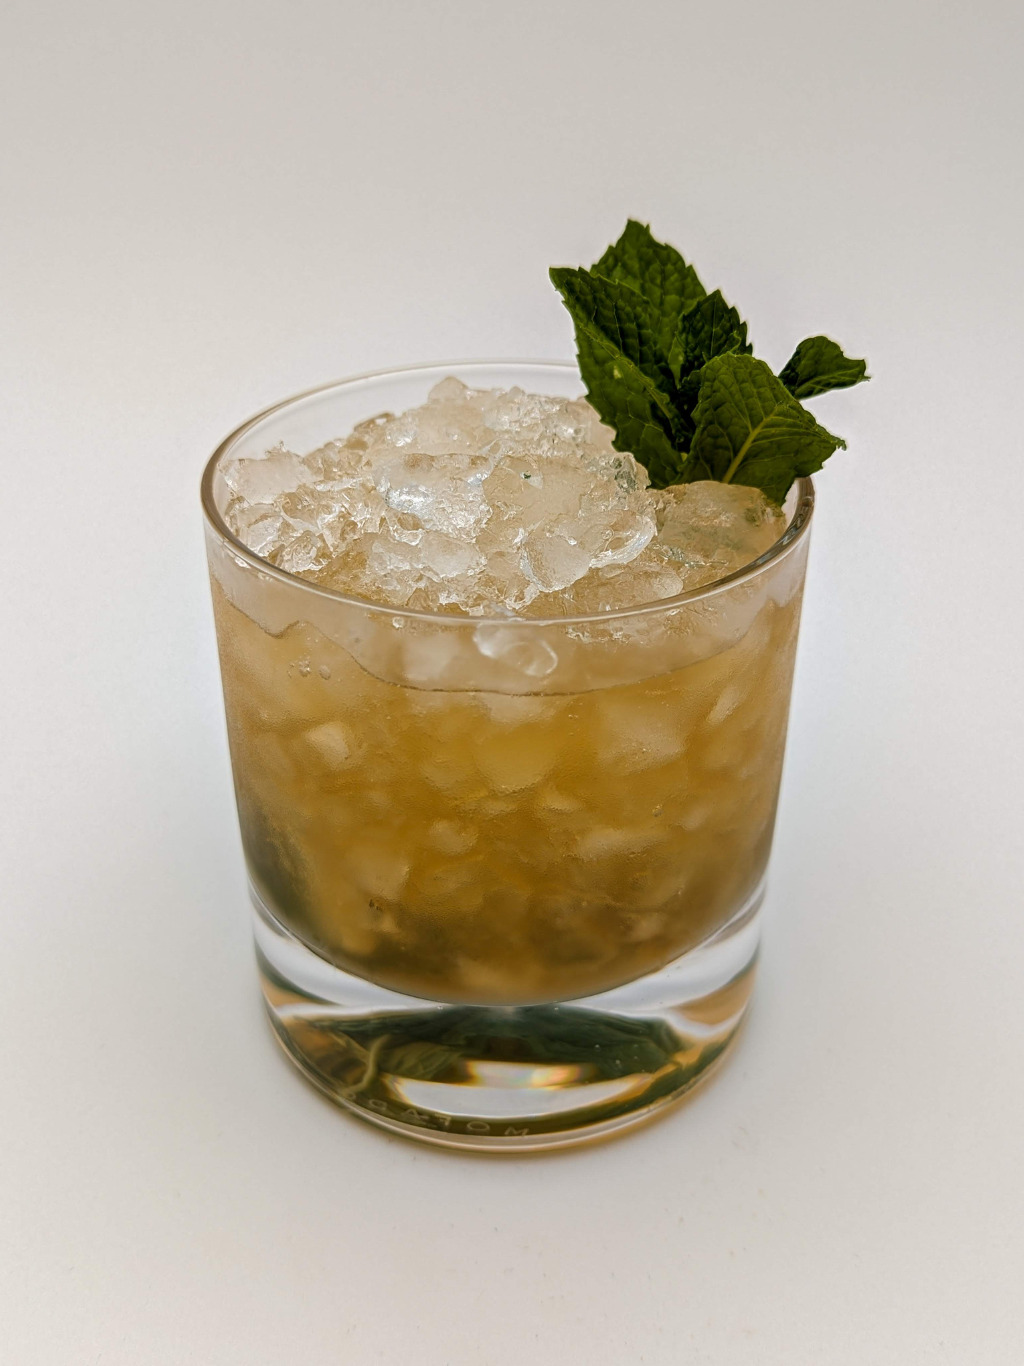 Golden brown liquid in a rocks glass filled with crushed ice with a mint sprig garnish